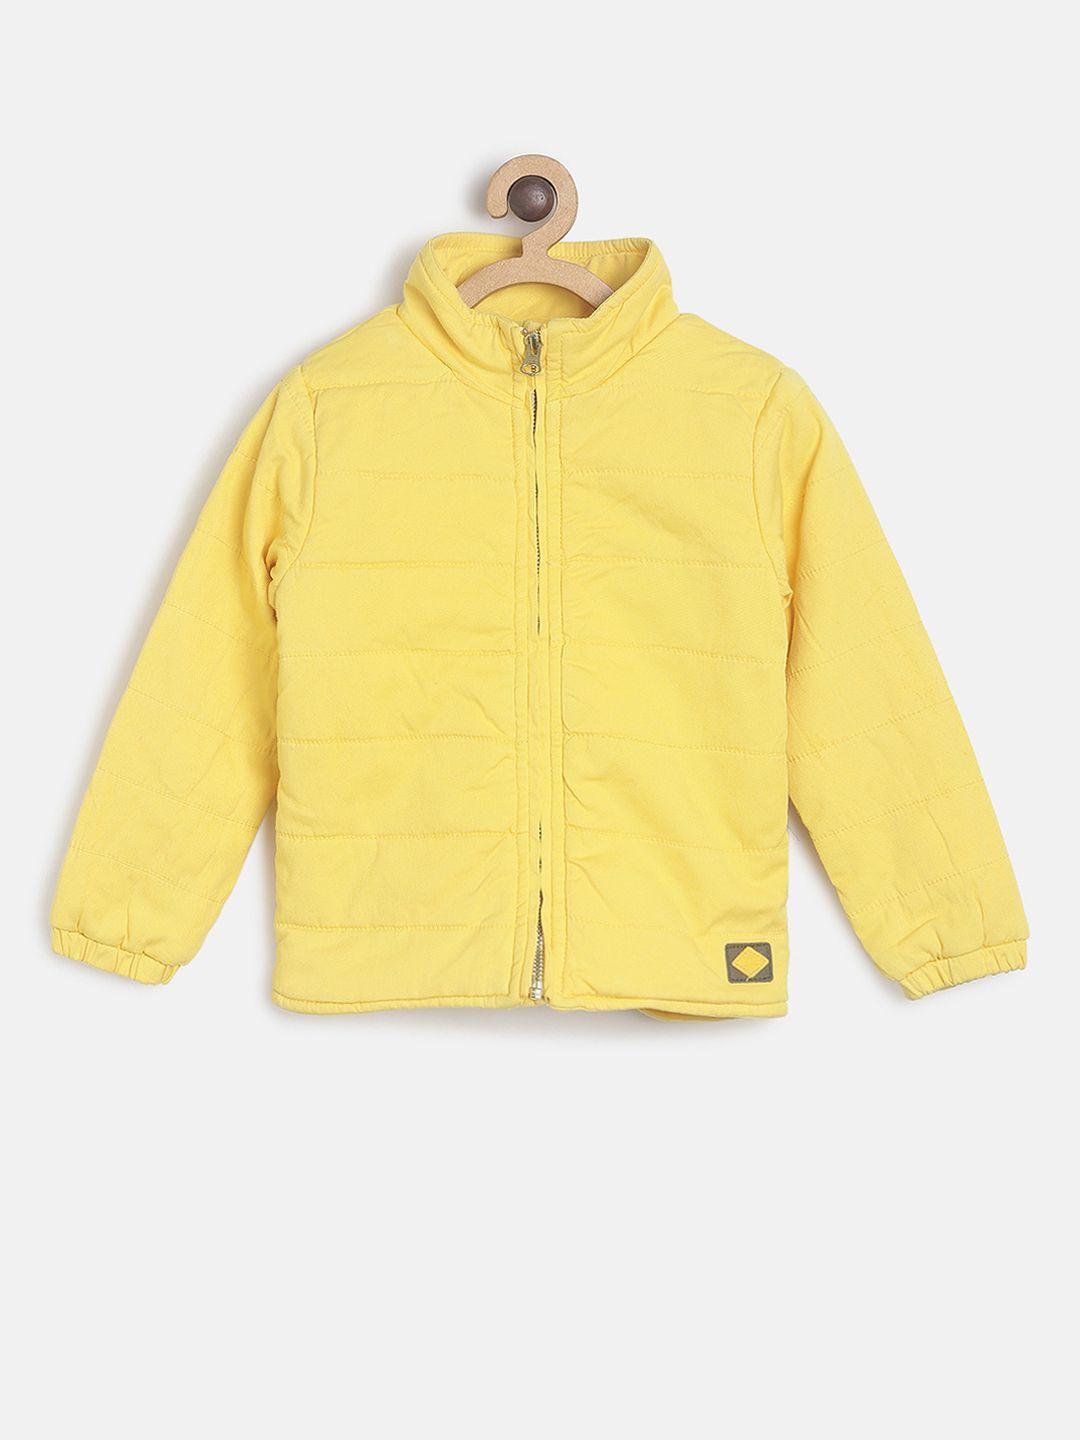 tales & stories boys yellow lightweight padded jacket